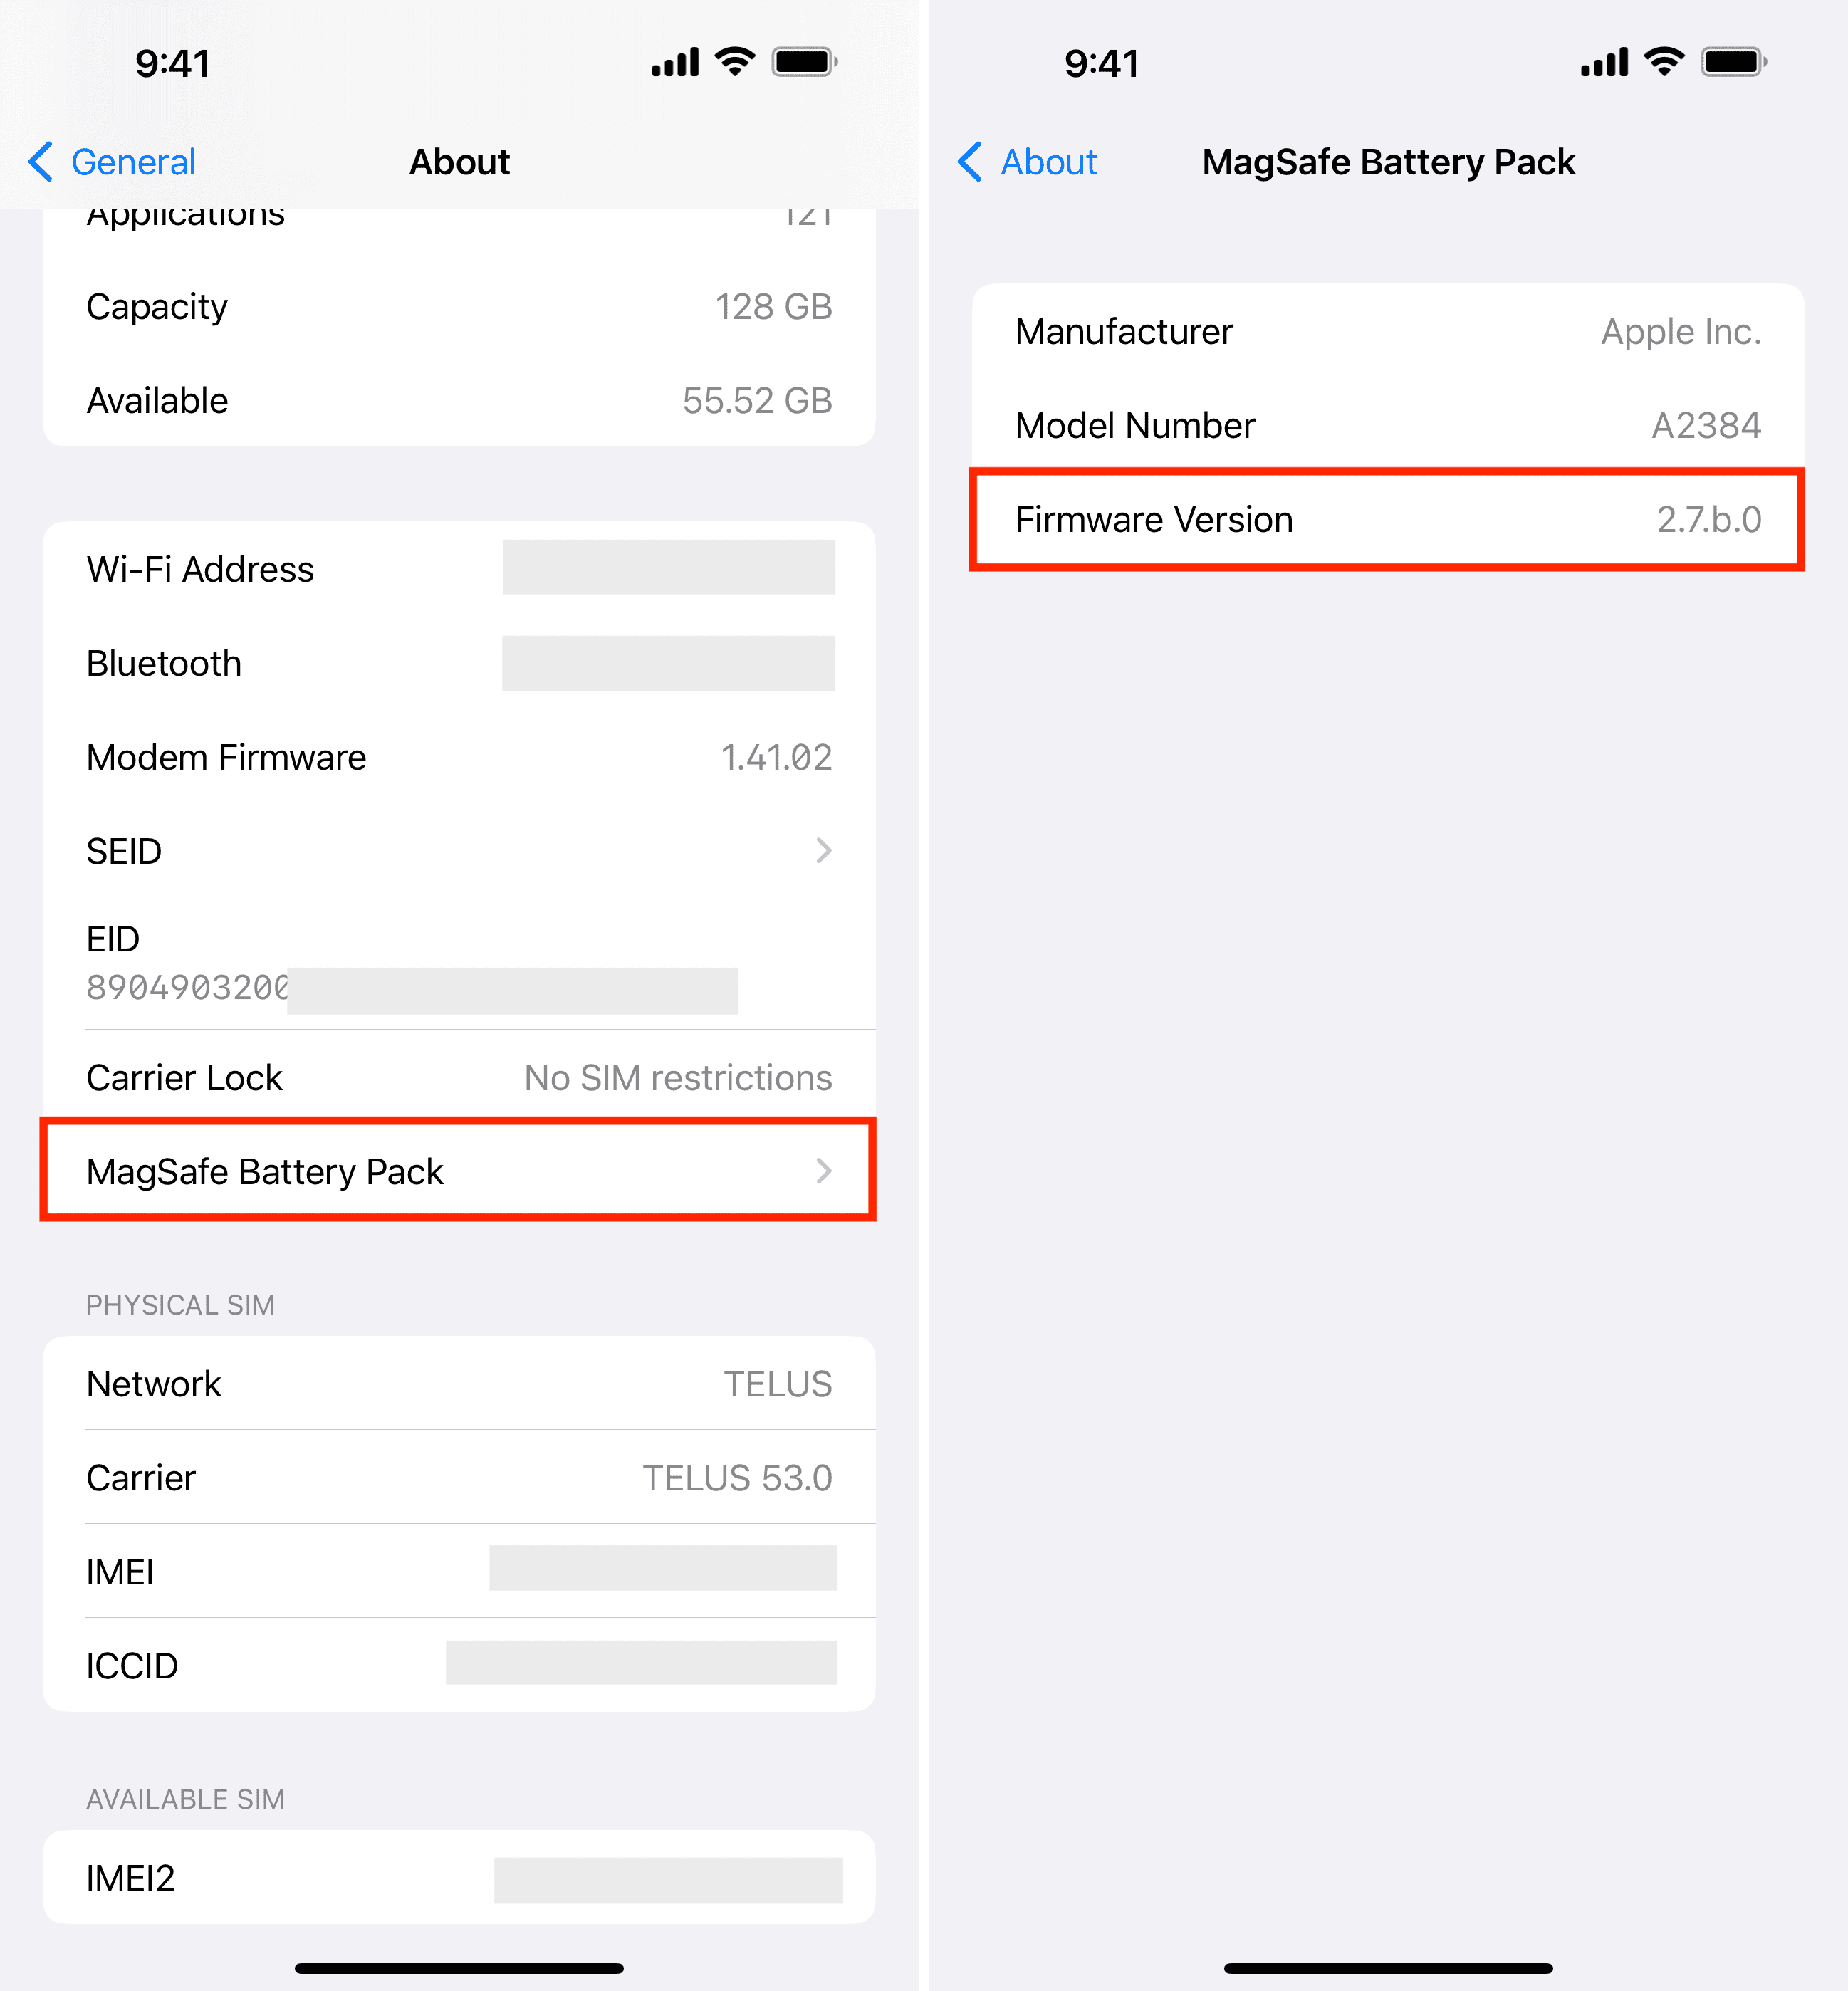 See Firmware Version of MagSafe Battery Pack